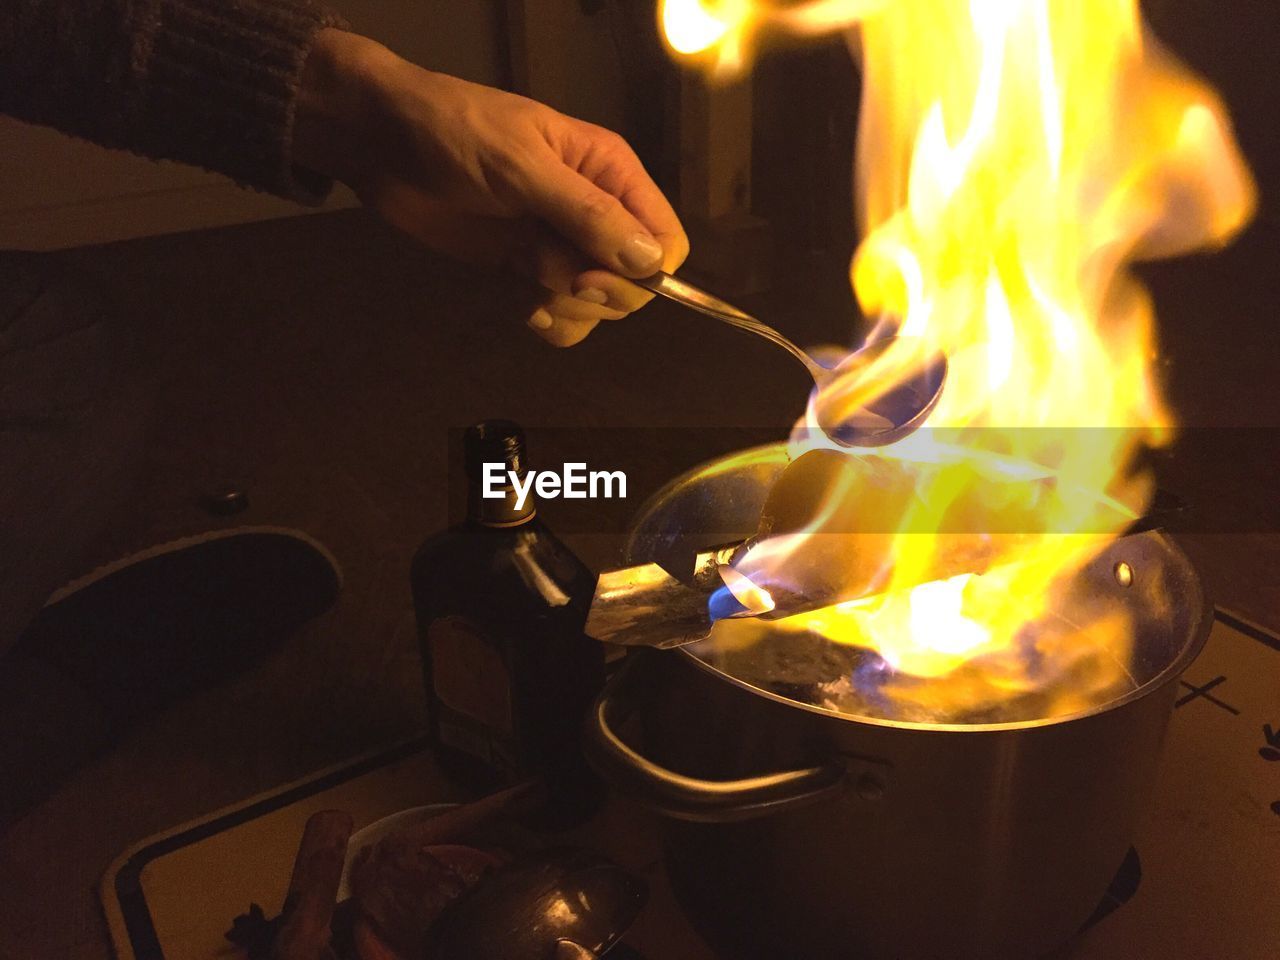 Cropped hand making feuerzangenbowle